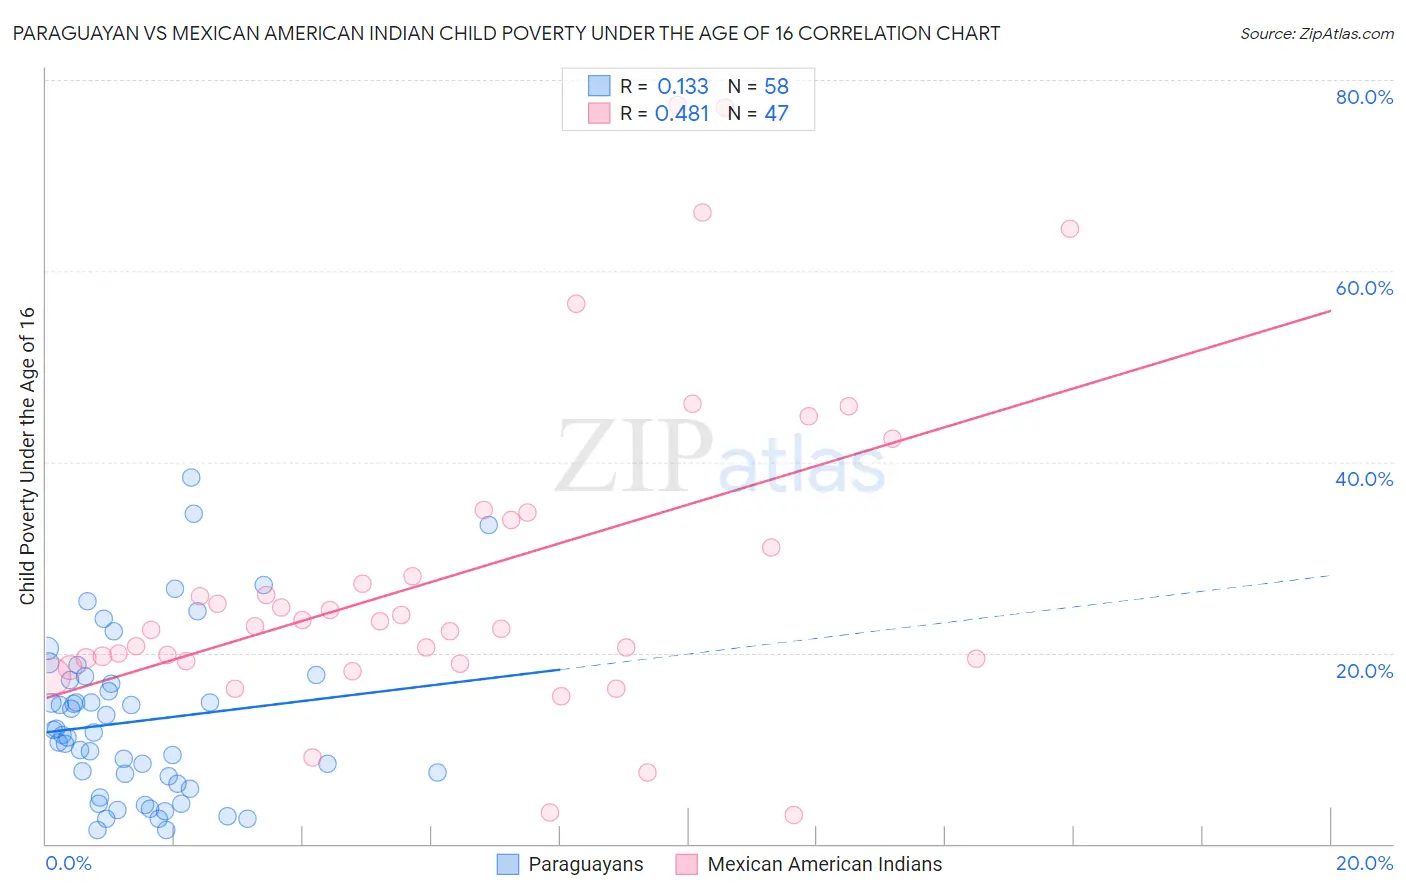 Paraguayan vs Mexican American Indian Child Poverty Under the Age of 16